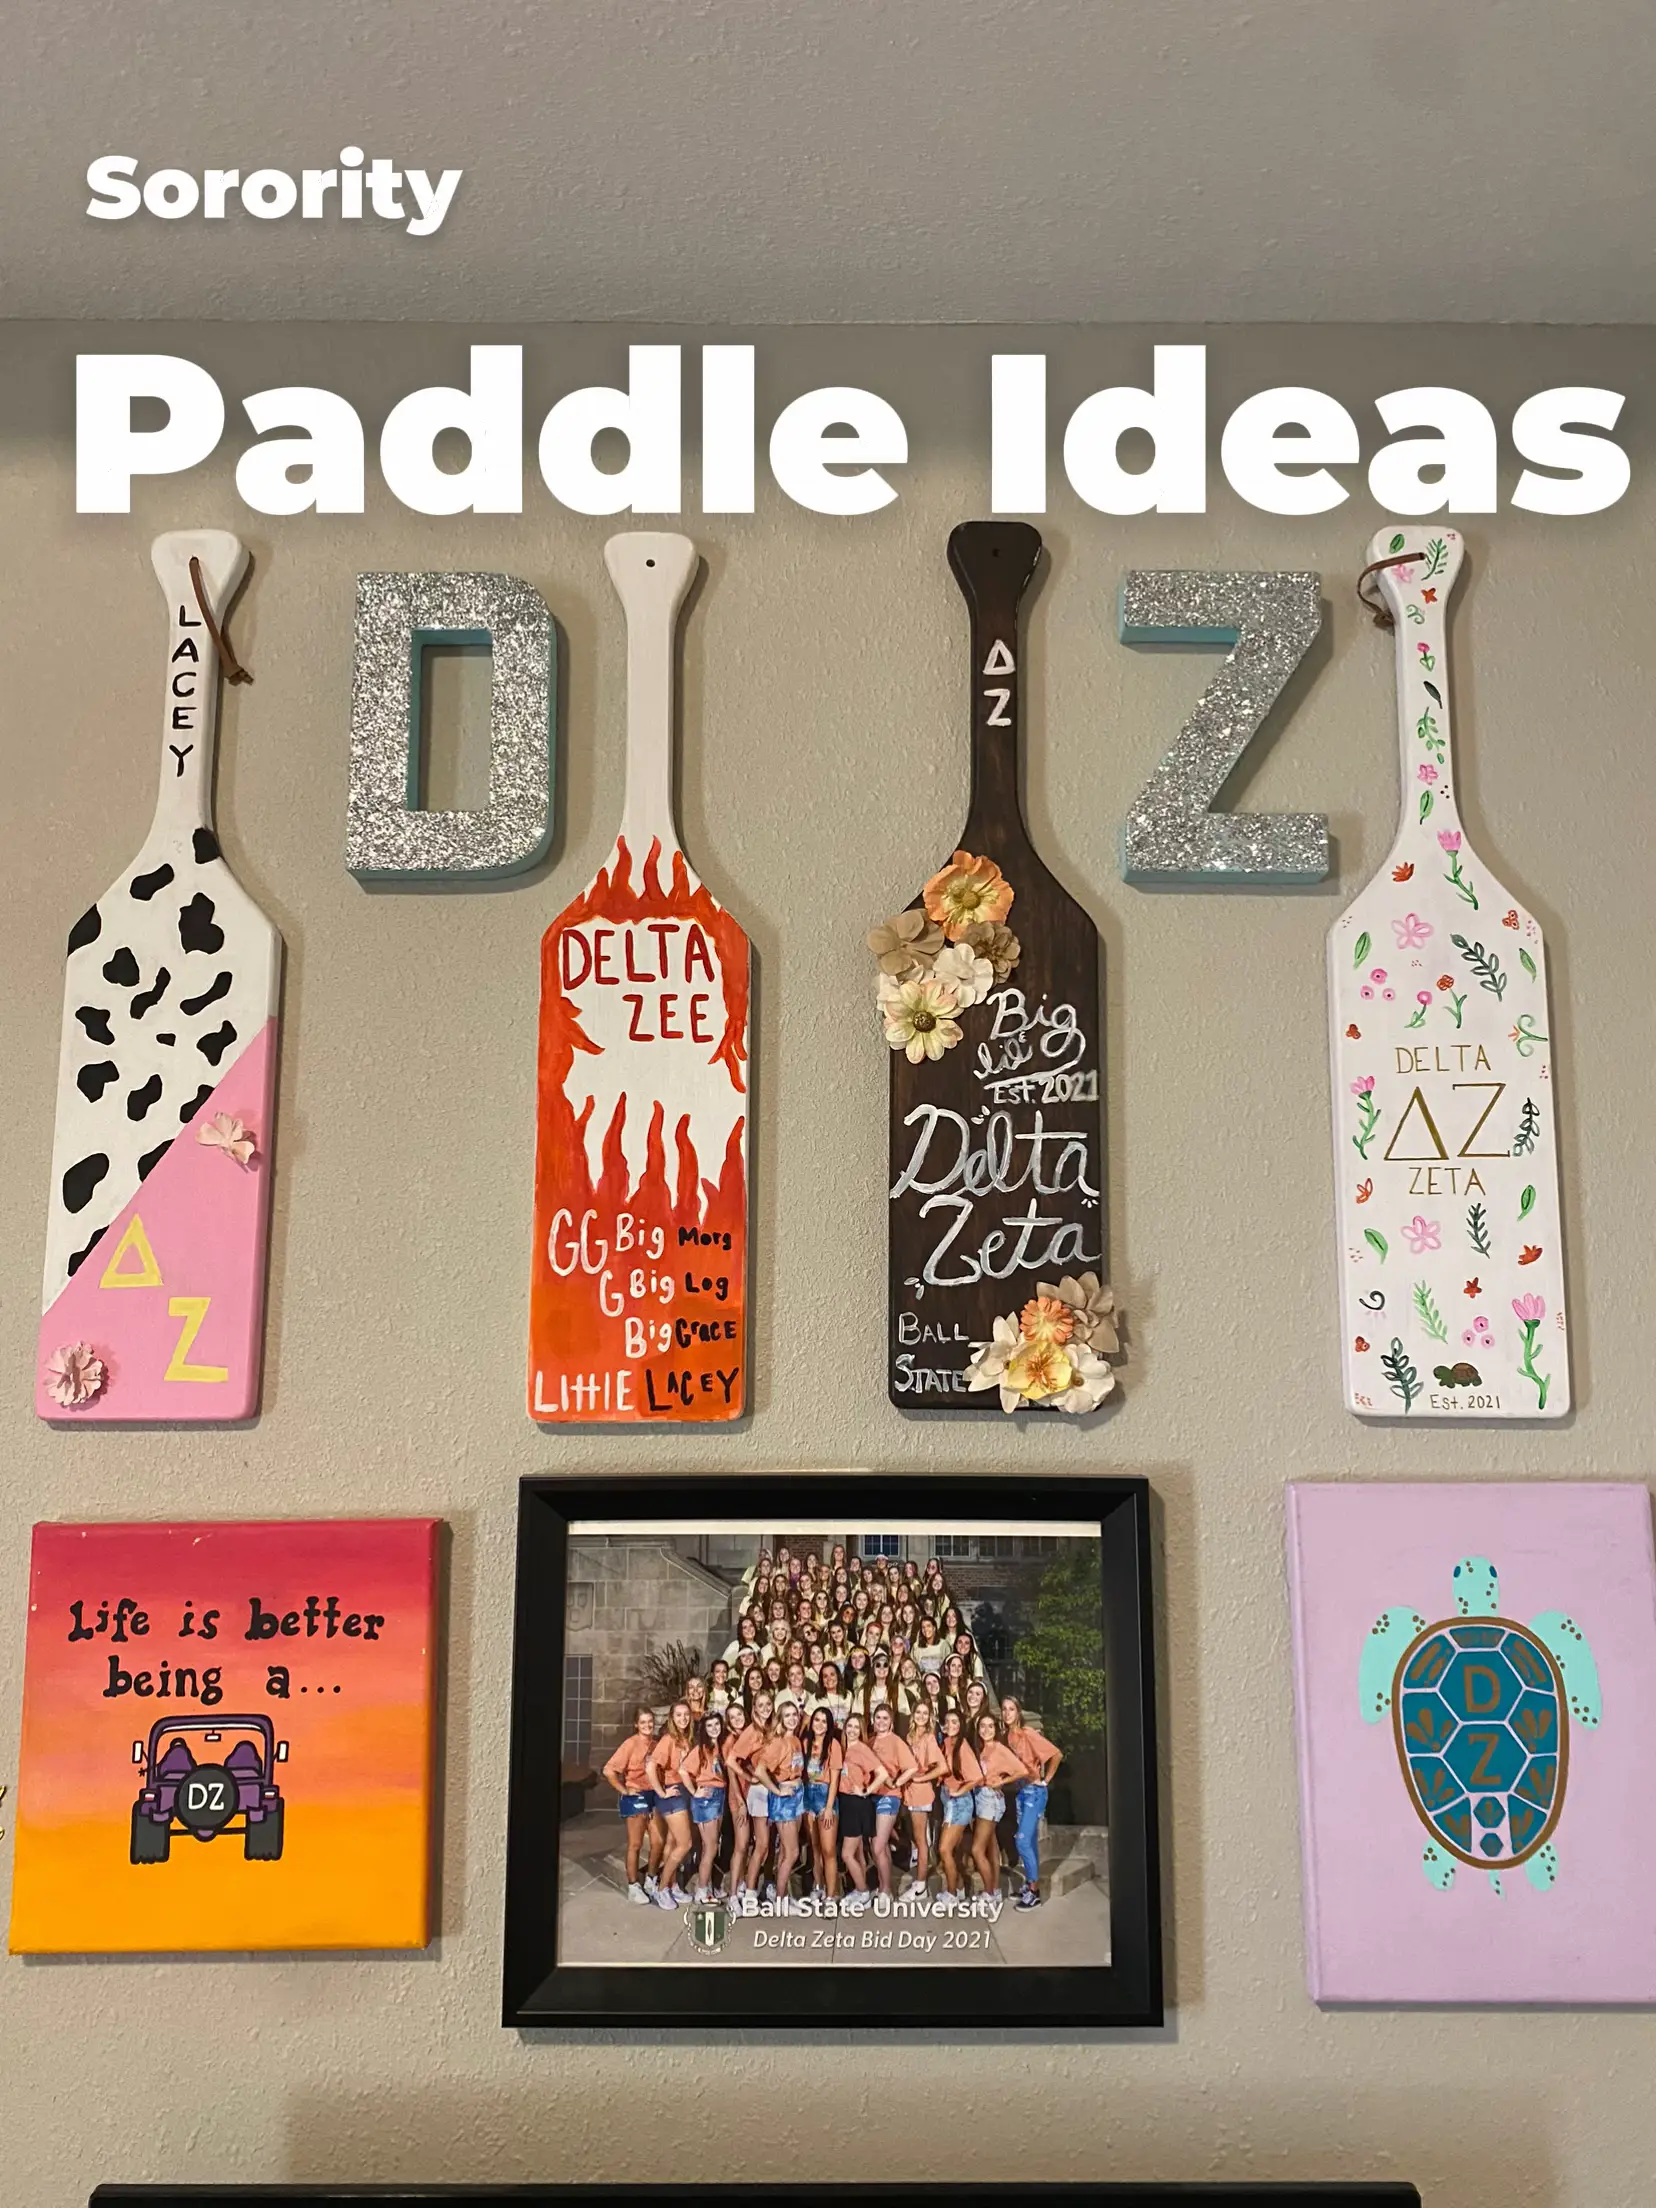 Sorority Paddle Ideas, Gallery posted by Lacey Hammett